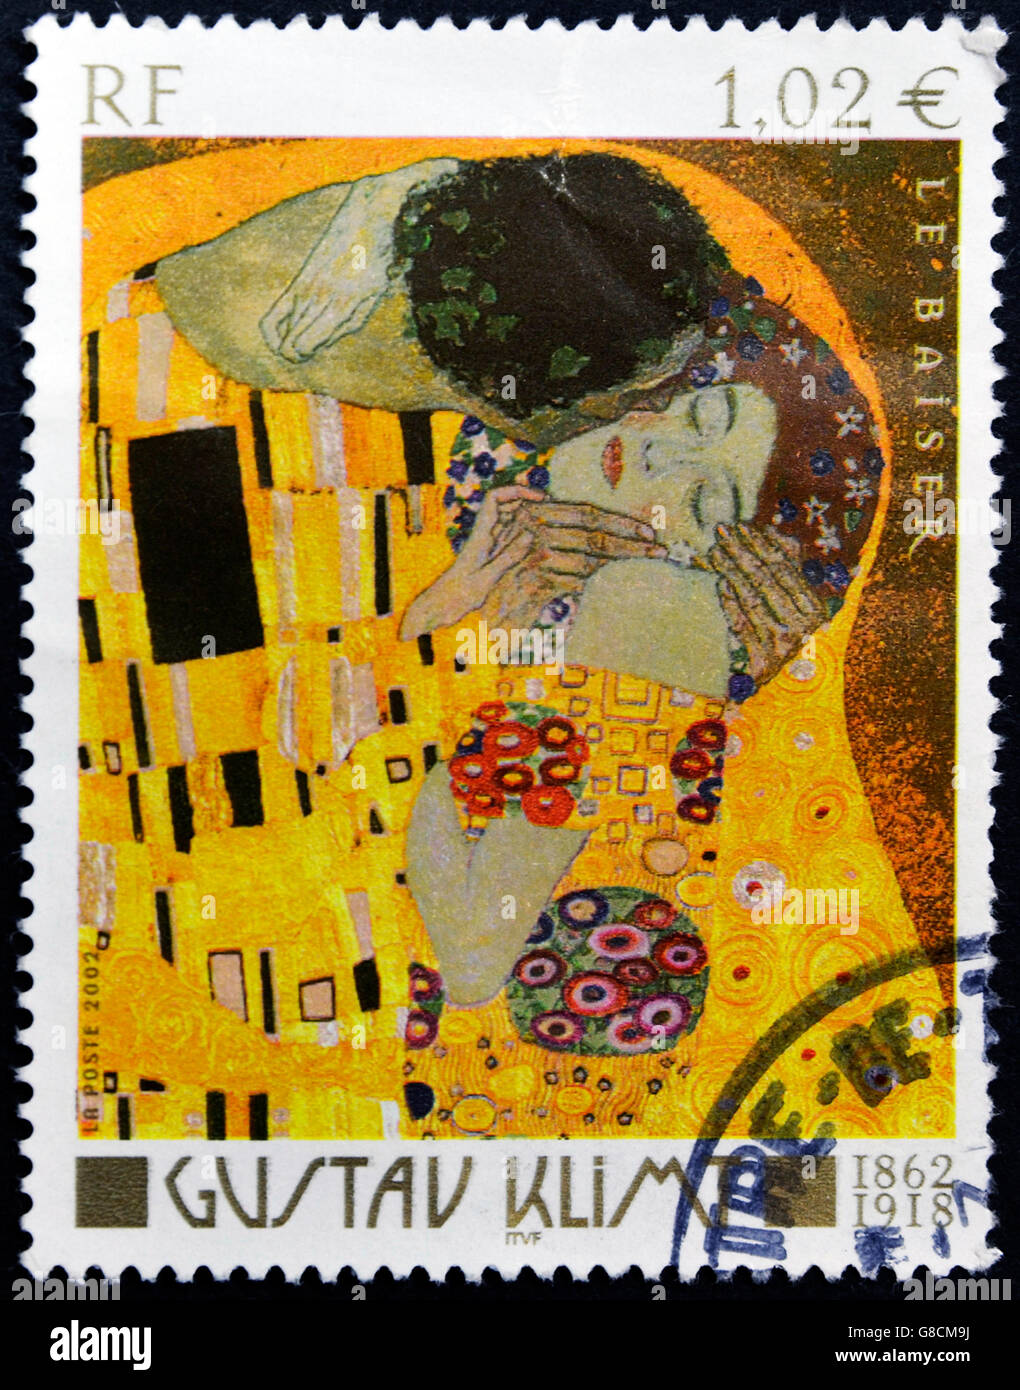 FRANCE - CIRCA 2002: A stamp printed in France shows The Kiss by Gustav Klimt, circa 2002 Stock Photo